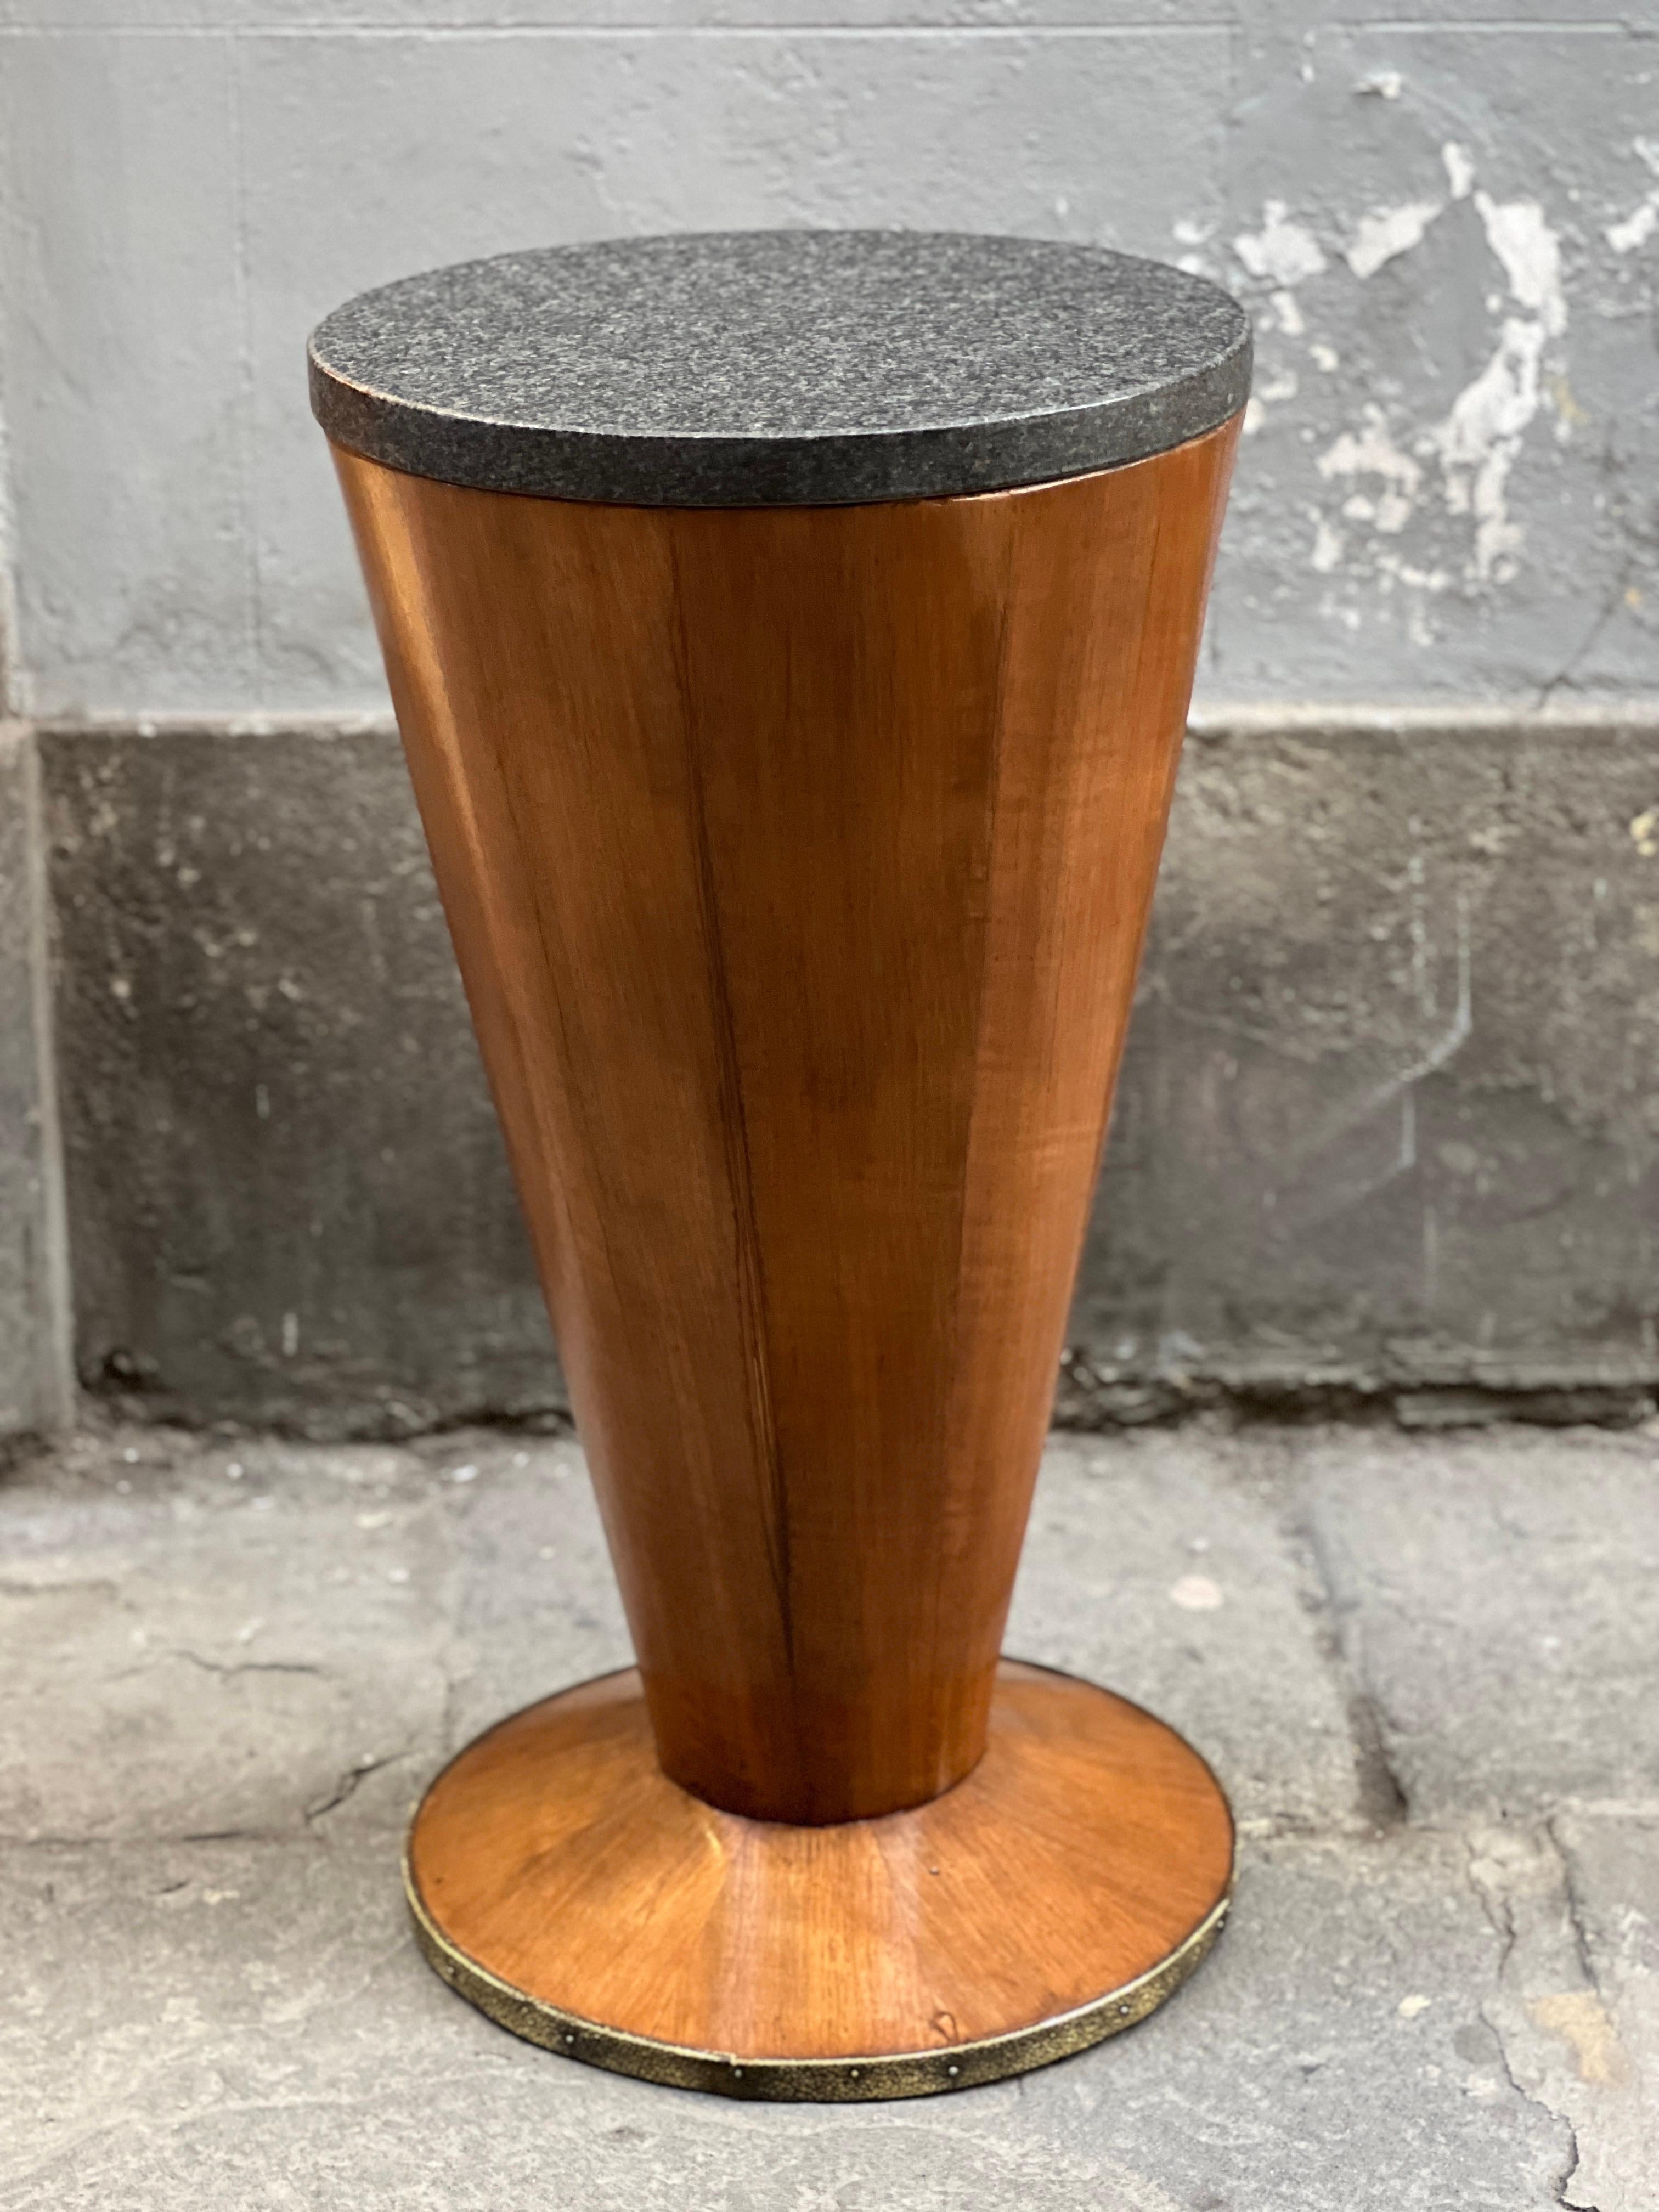 Pair of Art Deco Conical Cherry Wood Side Tables with Marble top.
The round base is enhanced in expertly chiseled gilded bronze.